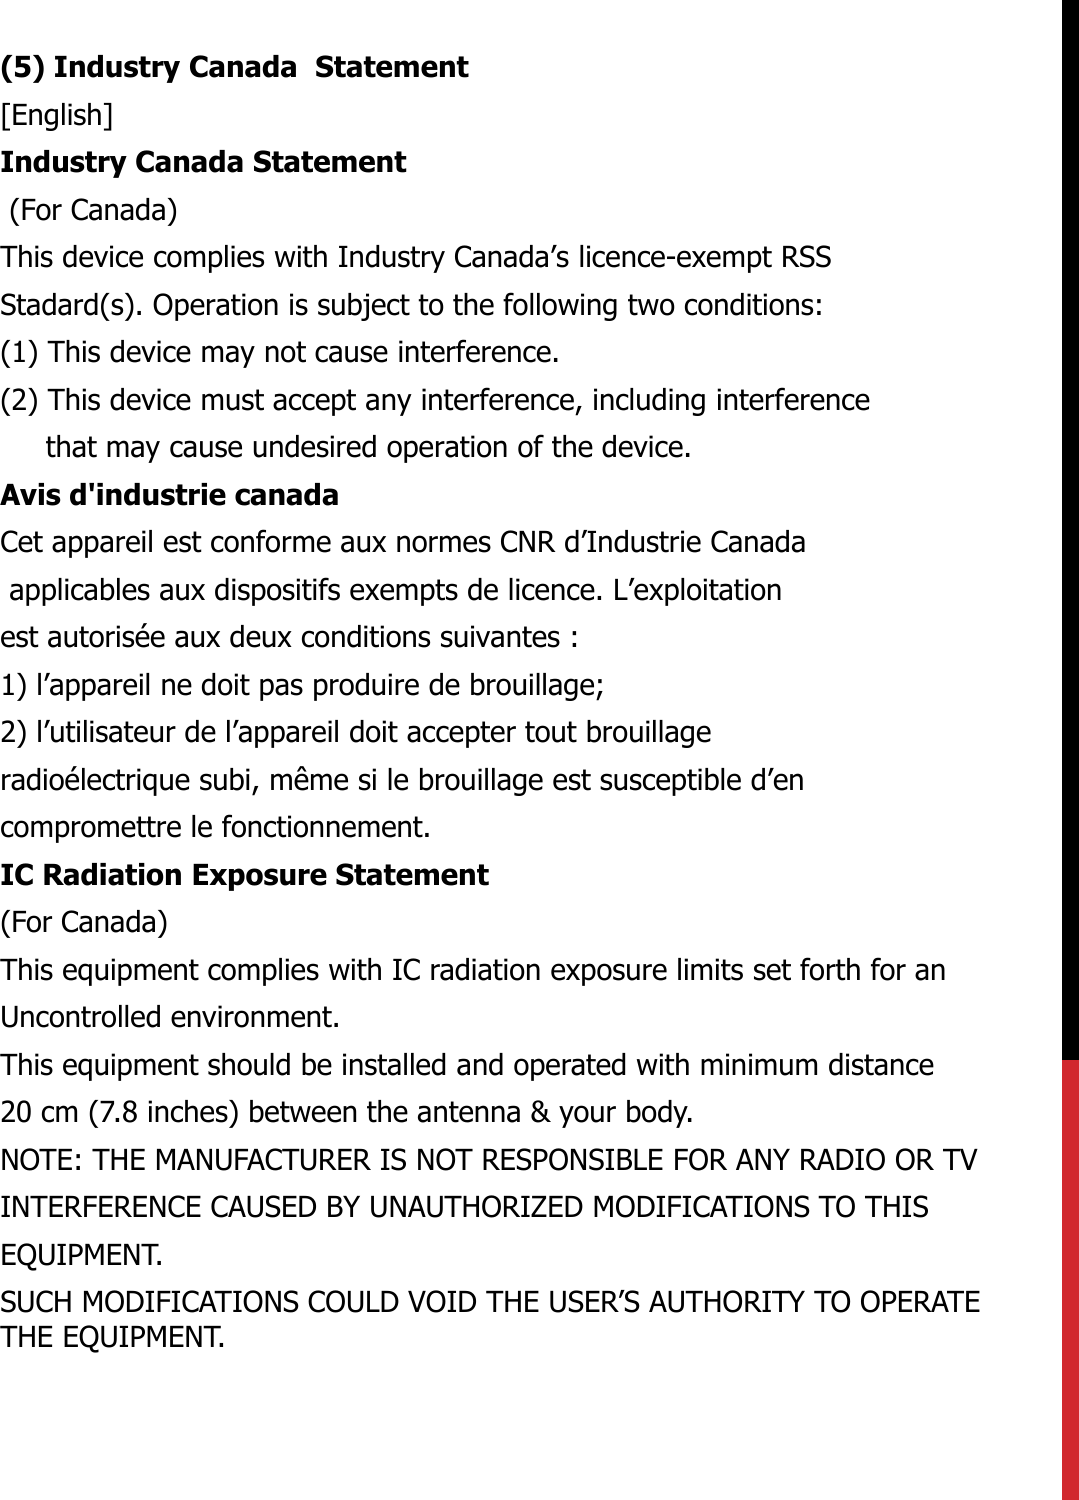 (5) Industry Canada  Statement[English]Industry Canada Statement(For Canada)This device complies with Industry Canada’s licence-exempt RSS Stadard(s). Operation is subject to the following two conditions:(1) This device may not cause interference.(2) This device must accept any interference, including interference that may cause undesired operation of the device. Avis d&apos;industrie canadaCet appareil est conforme aux normes CNR d’Industrie Canada applicables aux dispositifs exempts de licence. L’exploitation est autorisée aux deux conditions suivantes :  1) l’appareil ne doit pas produire de brouillage;2) l’utilisateur de l’appareil doit accepter tout brouillageradioélectrique subi, même si le brouillage est susceptible d’encompromettre le fonctionnement.IC Radiation Exposure Statement(For Canada)This equipment complies with IC radiation exposure limits set forth for anUncontrolled environment.This equipment should be installed and operated with minimum distance20 cm (7.8 inches) between the antenna &amp; your body.NOTE: THE MANUFACTURER IS NOT RESPONSIBLE FOR ANY RADIO OR TVINTERFERENCE CAUSED BY UNAUTHORIZED MODIFICATIONS TO THISEQUIPMENT.SUCH MODIFICATIONS COULD VOID THE USER’S AUTHORITY TO OPERATETHE EQUIPMENT.